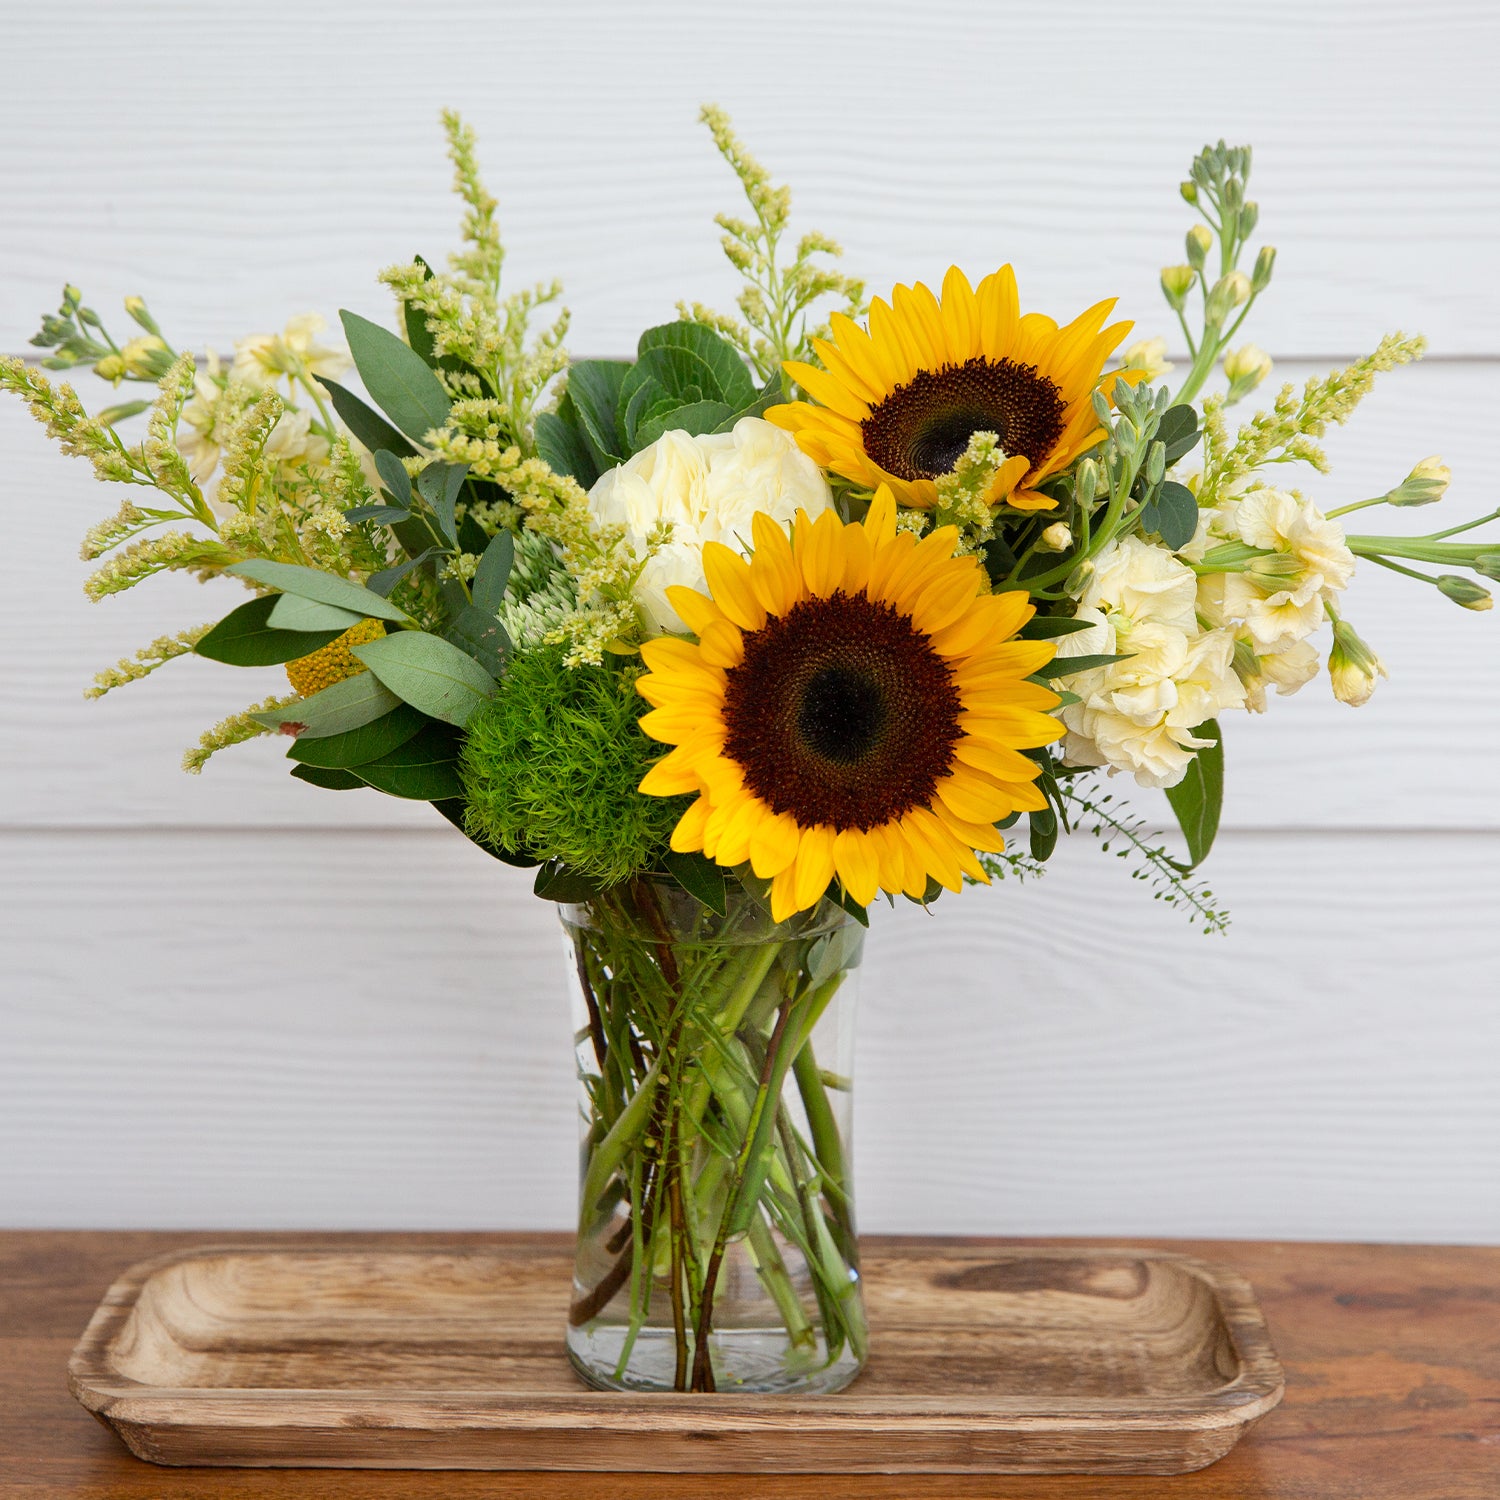 Vibrant bouquet featuring bright sunflowers, white roses, and lush greenery arranged in a clear prism vase, set upon a wooden tray, creating a cheerful display for any interior space, available at 46spruce.com.